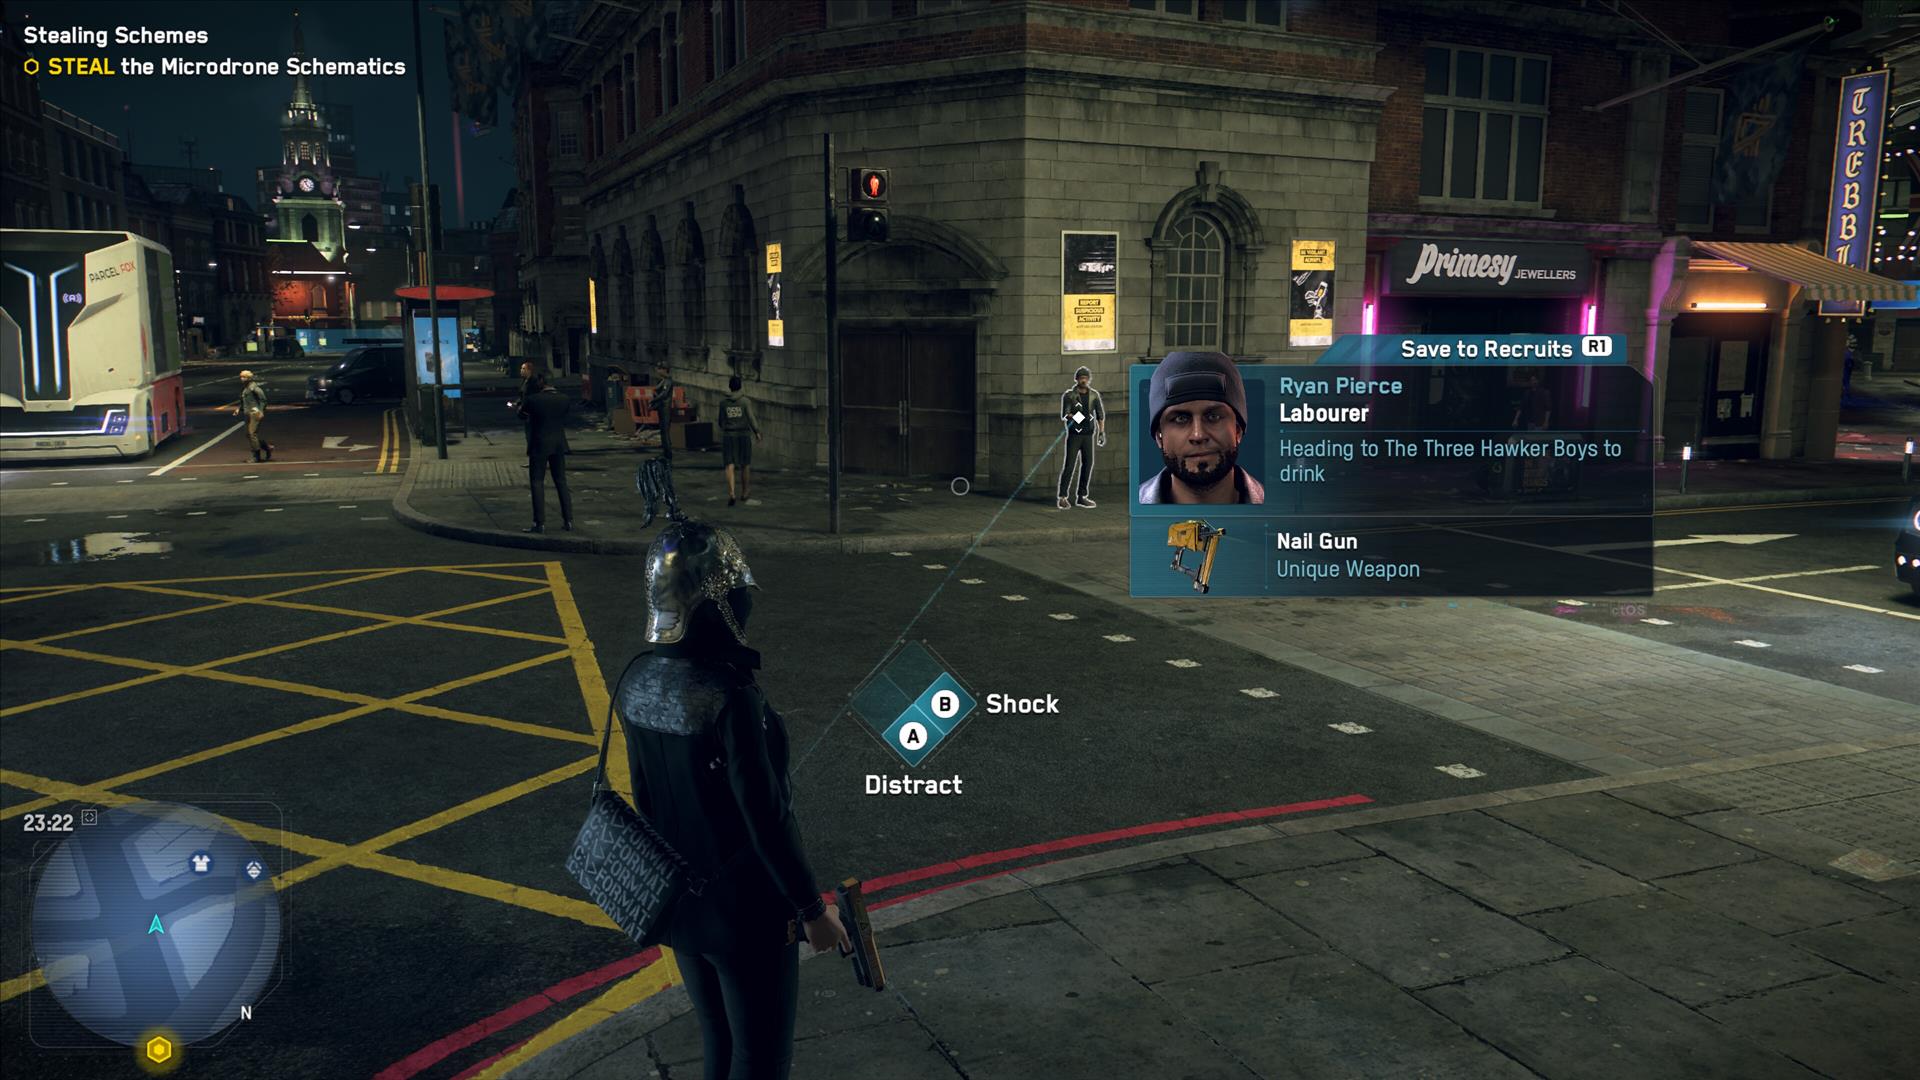 ACG on X: Watch Dogs Legion Review - The Nemesis System in an Open World  City? My review. share if you can!    / X